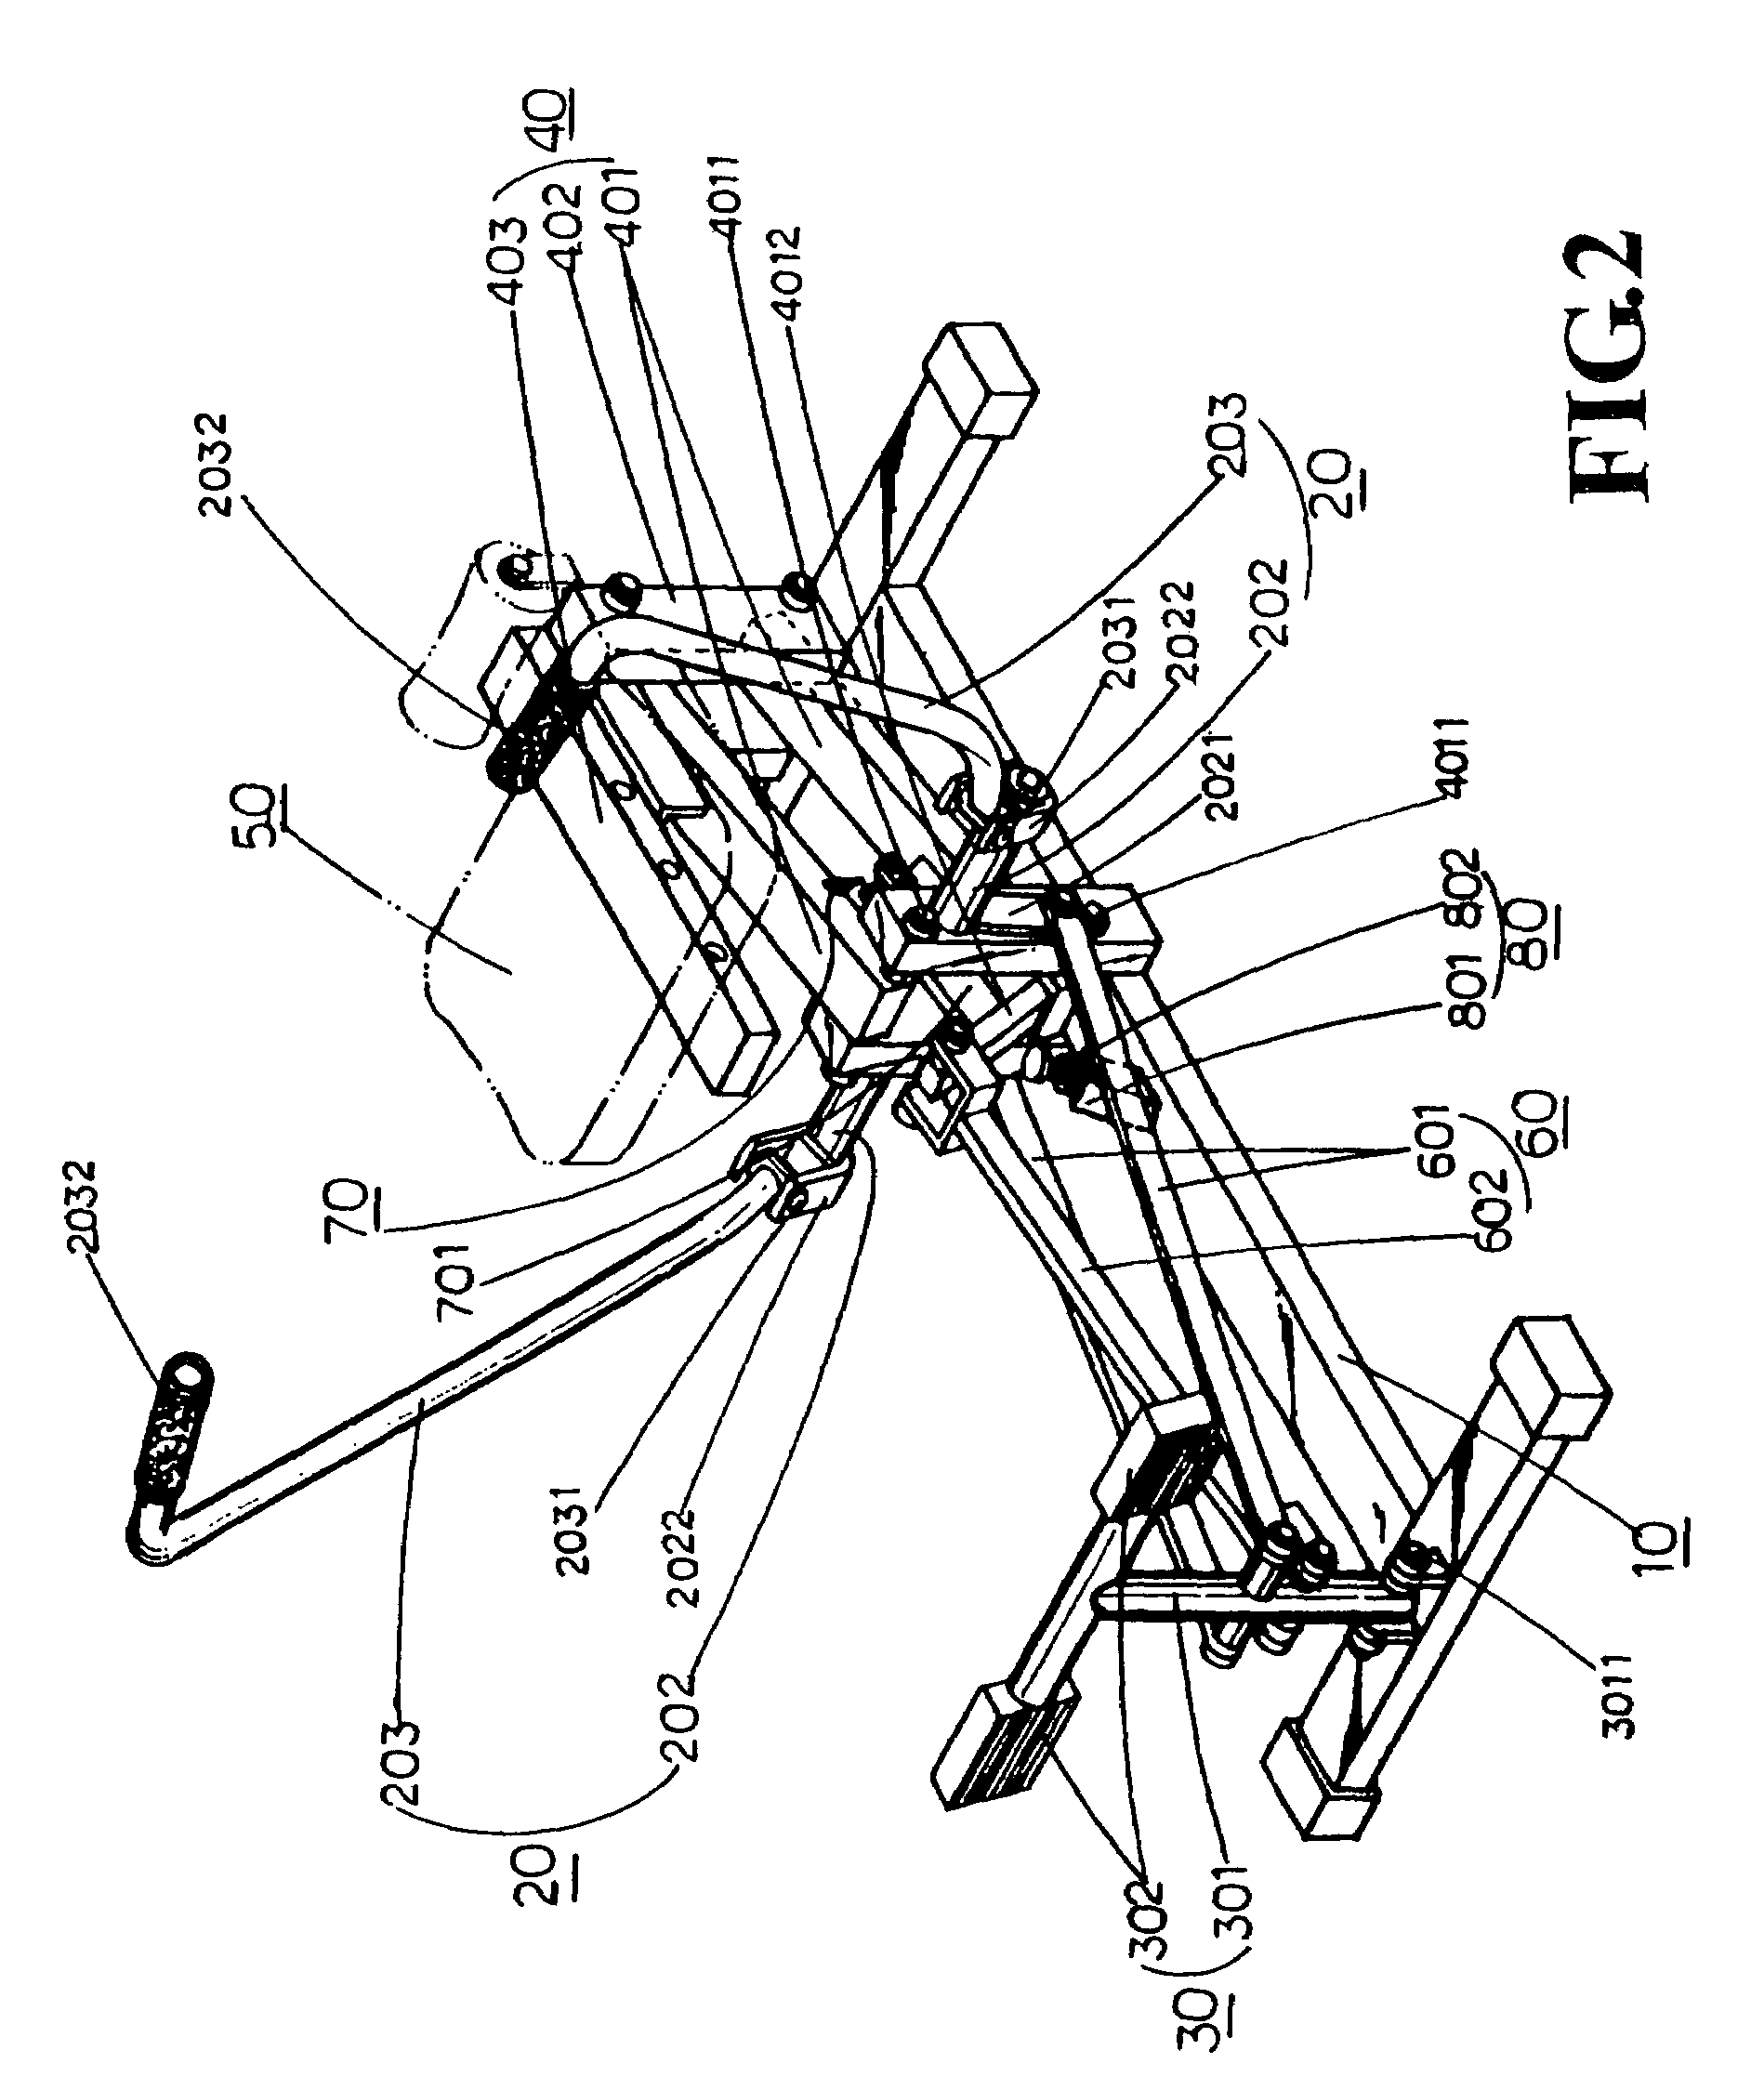 Rowing exercise device